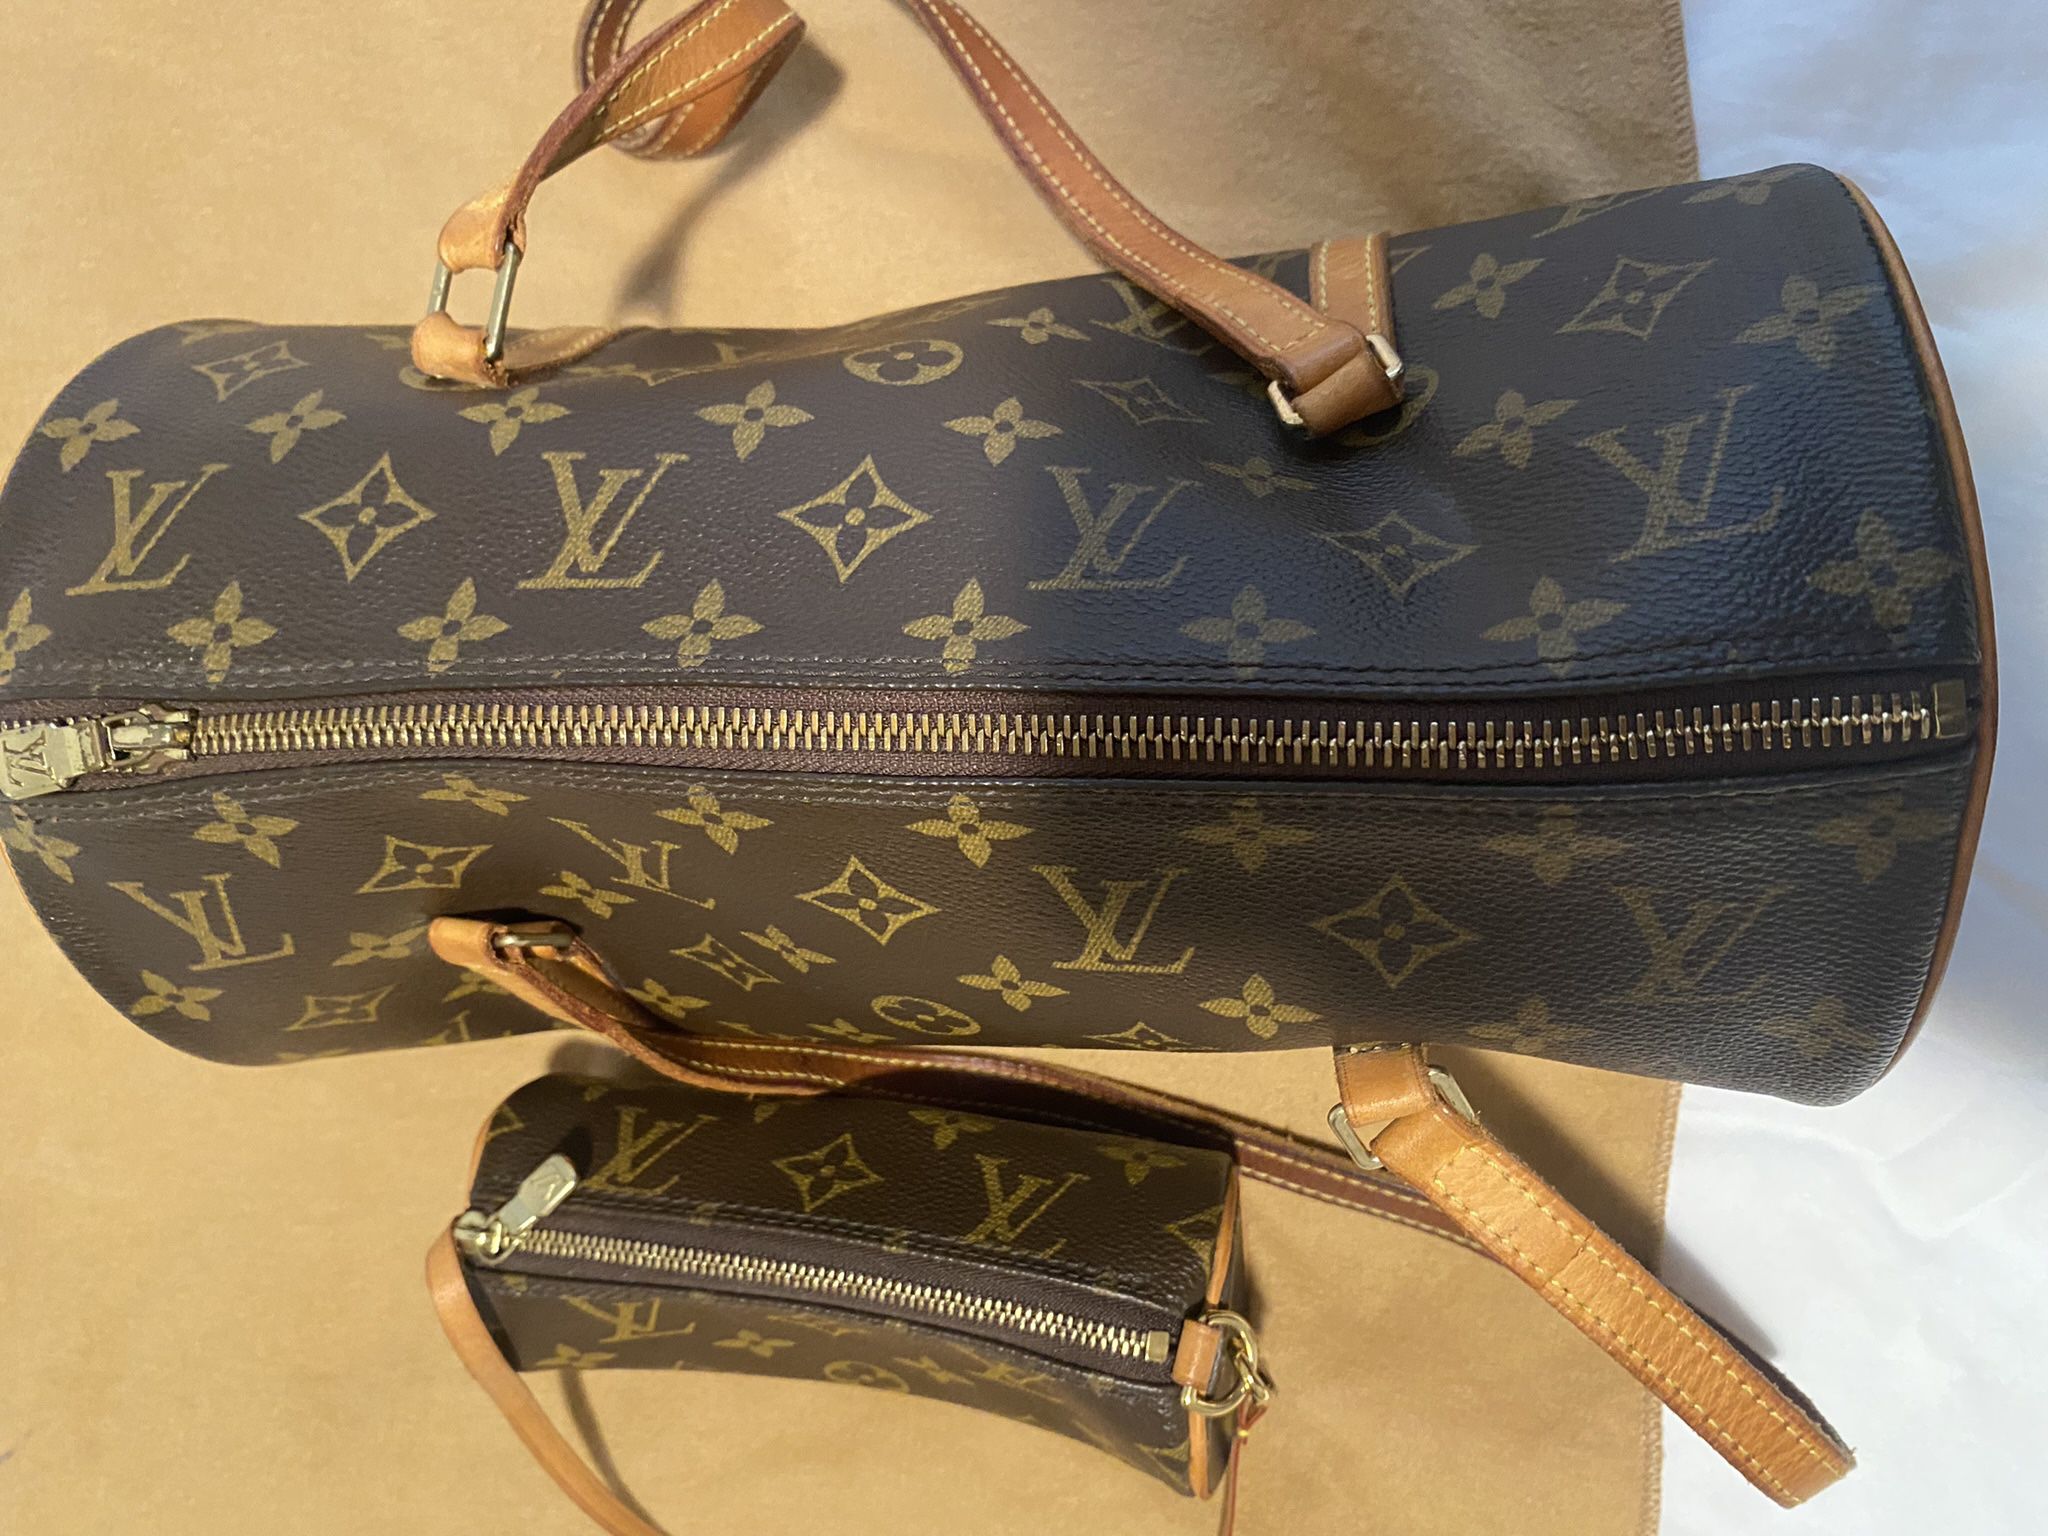 Authentic LV purse. In good condition. Barely used.